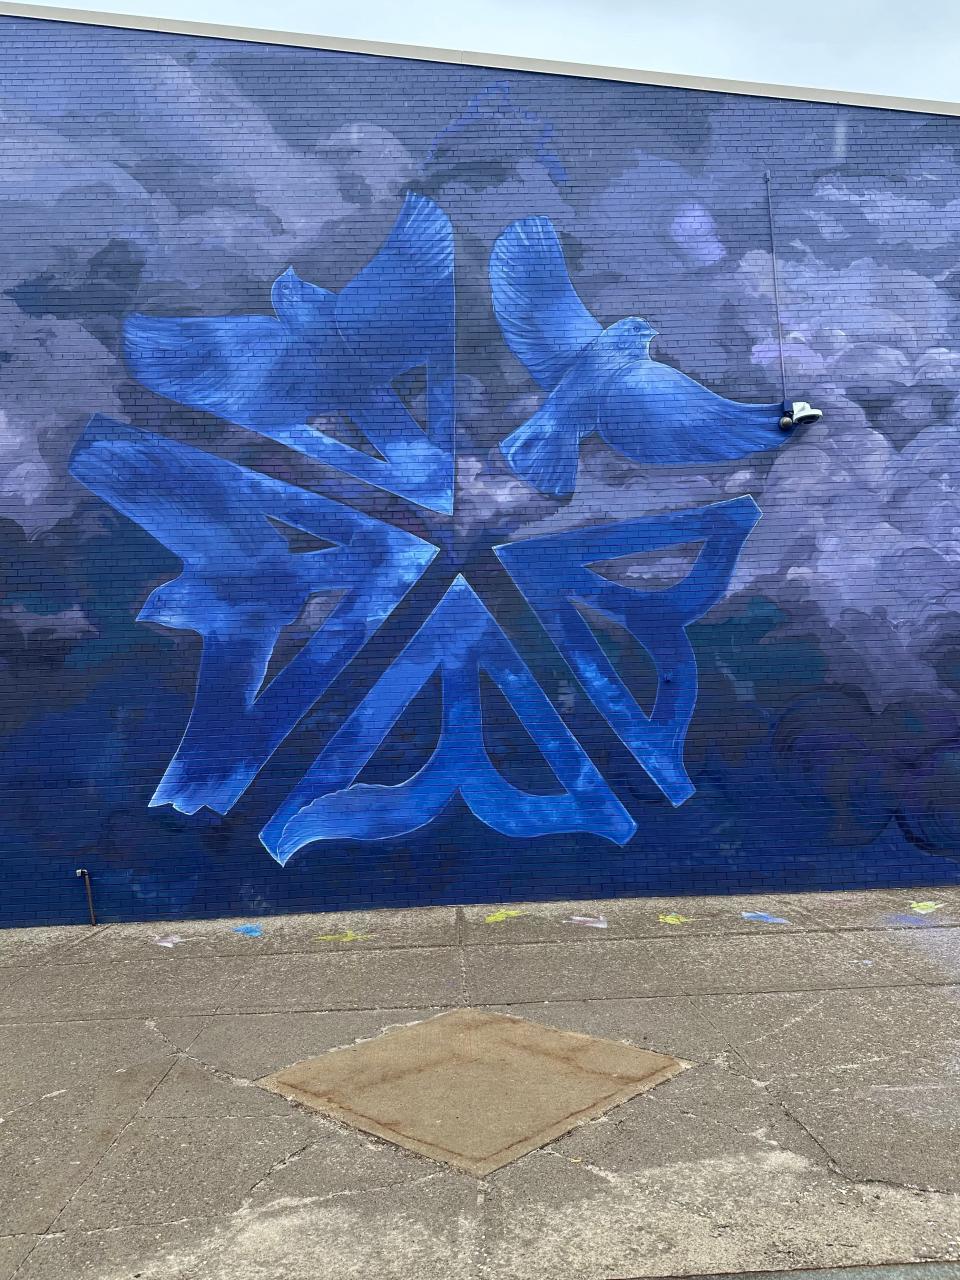 The mural of the front wall of the Edgerton R-Center now welcomes visitors with a unique take on the Rochester logo and birds taking flight on a stunning shades of blues and grays.